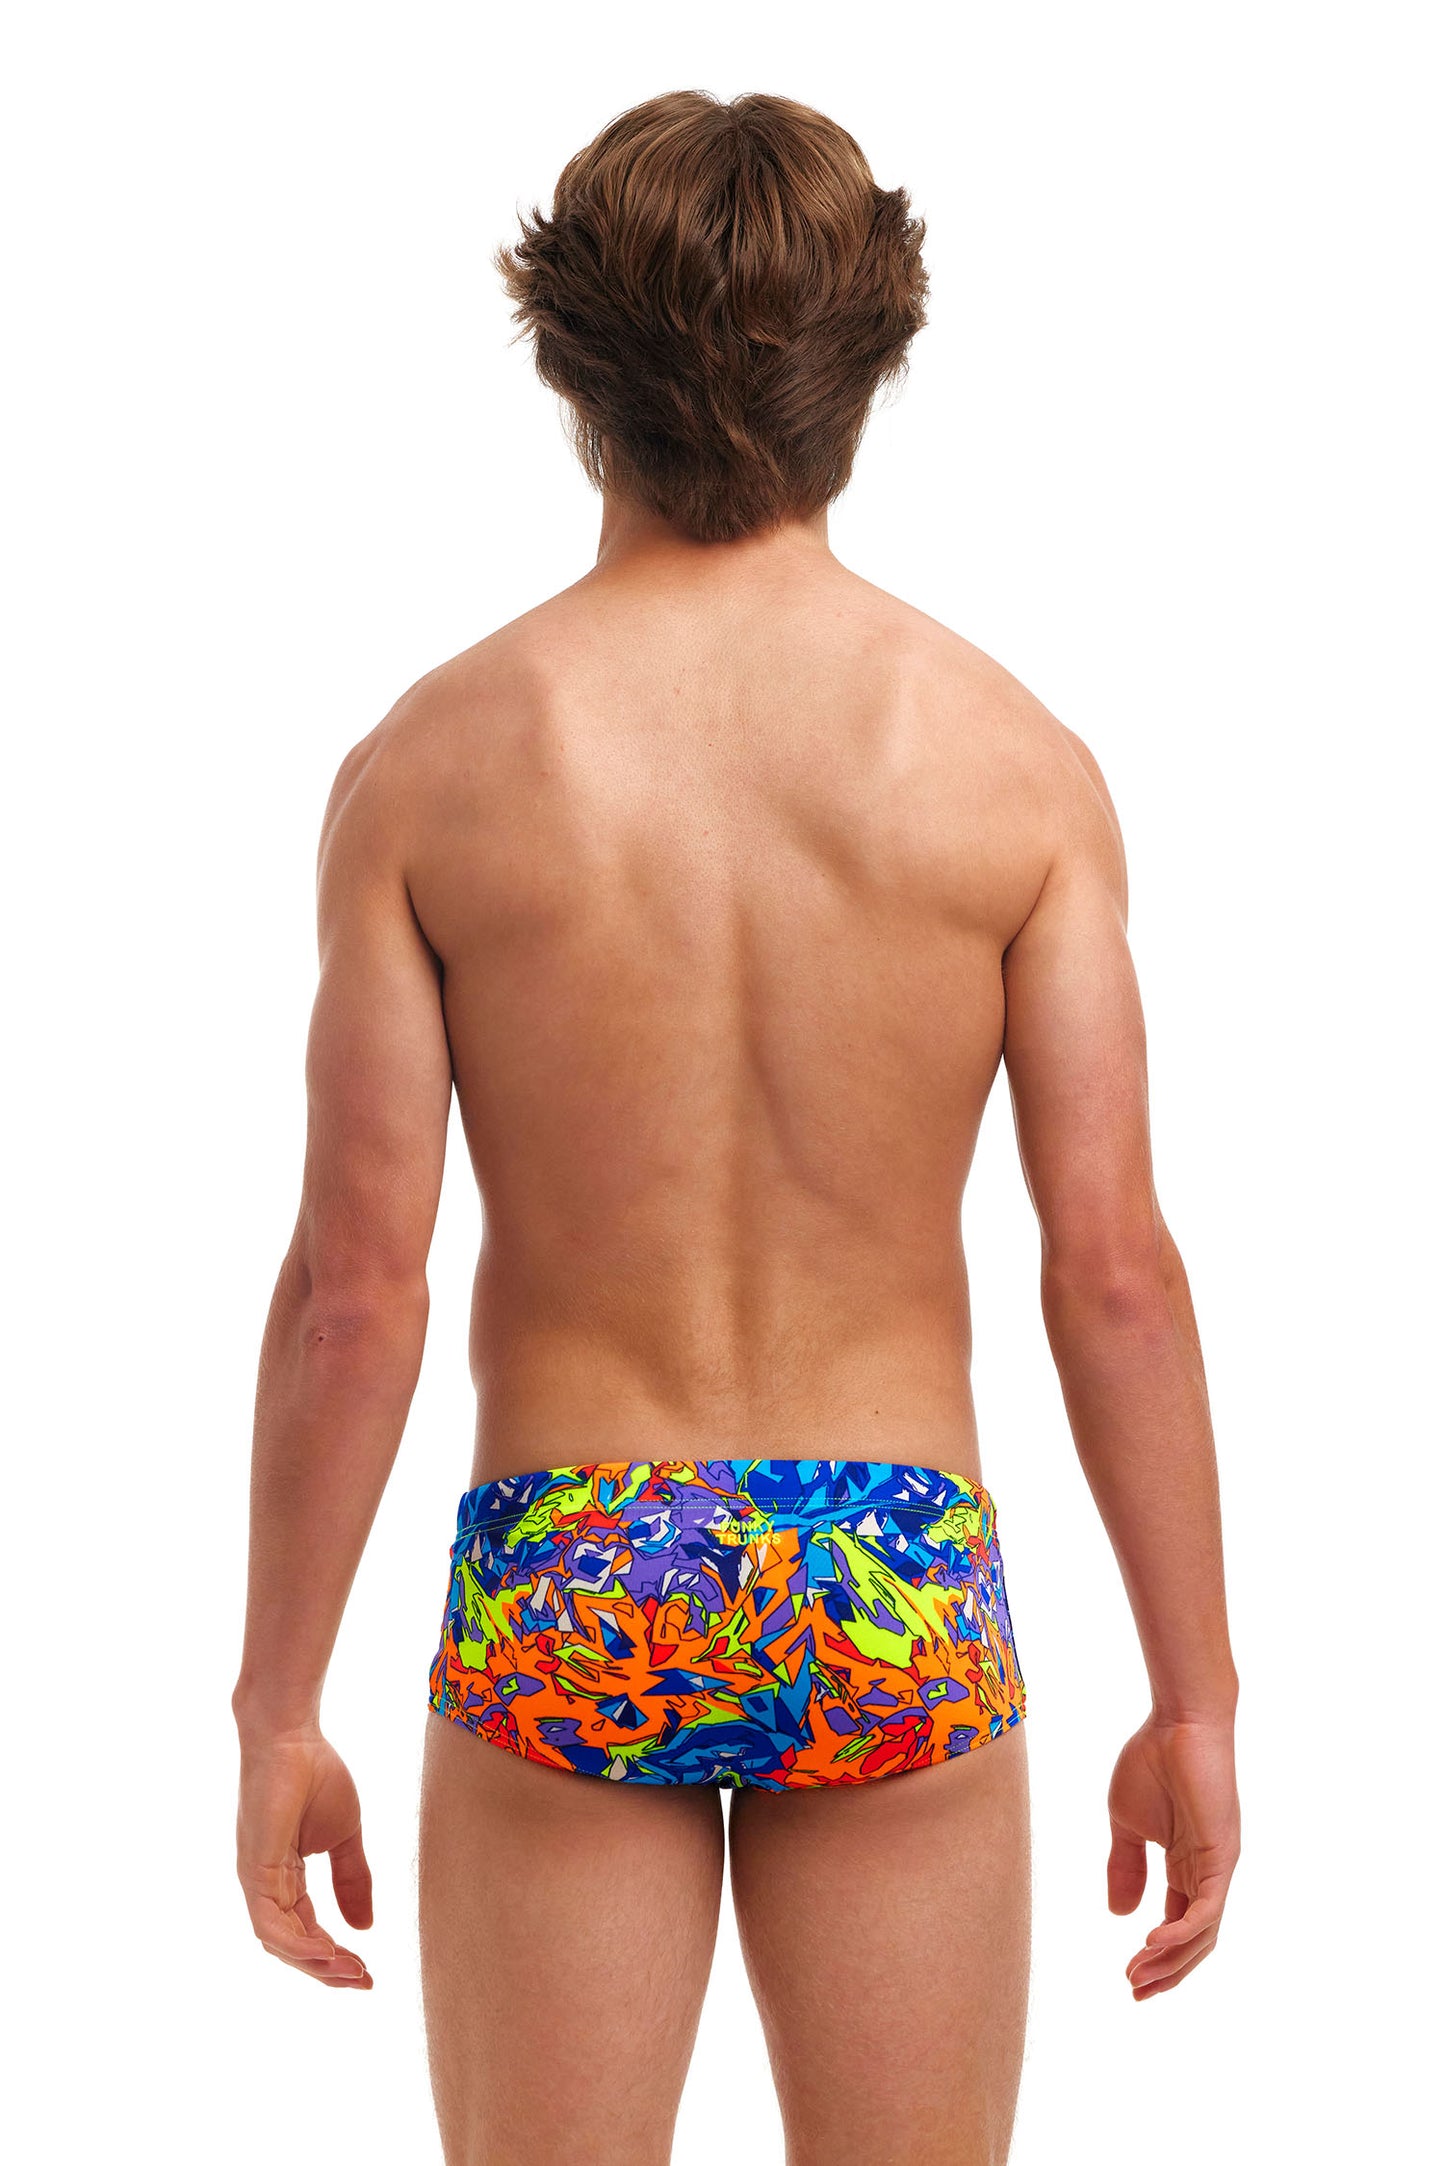 NEW! Funky Trunks Boys Eco Sidewinder Trunks Mixed Mess